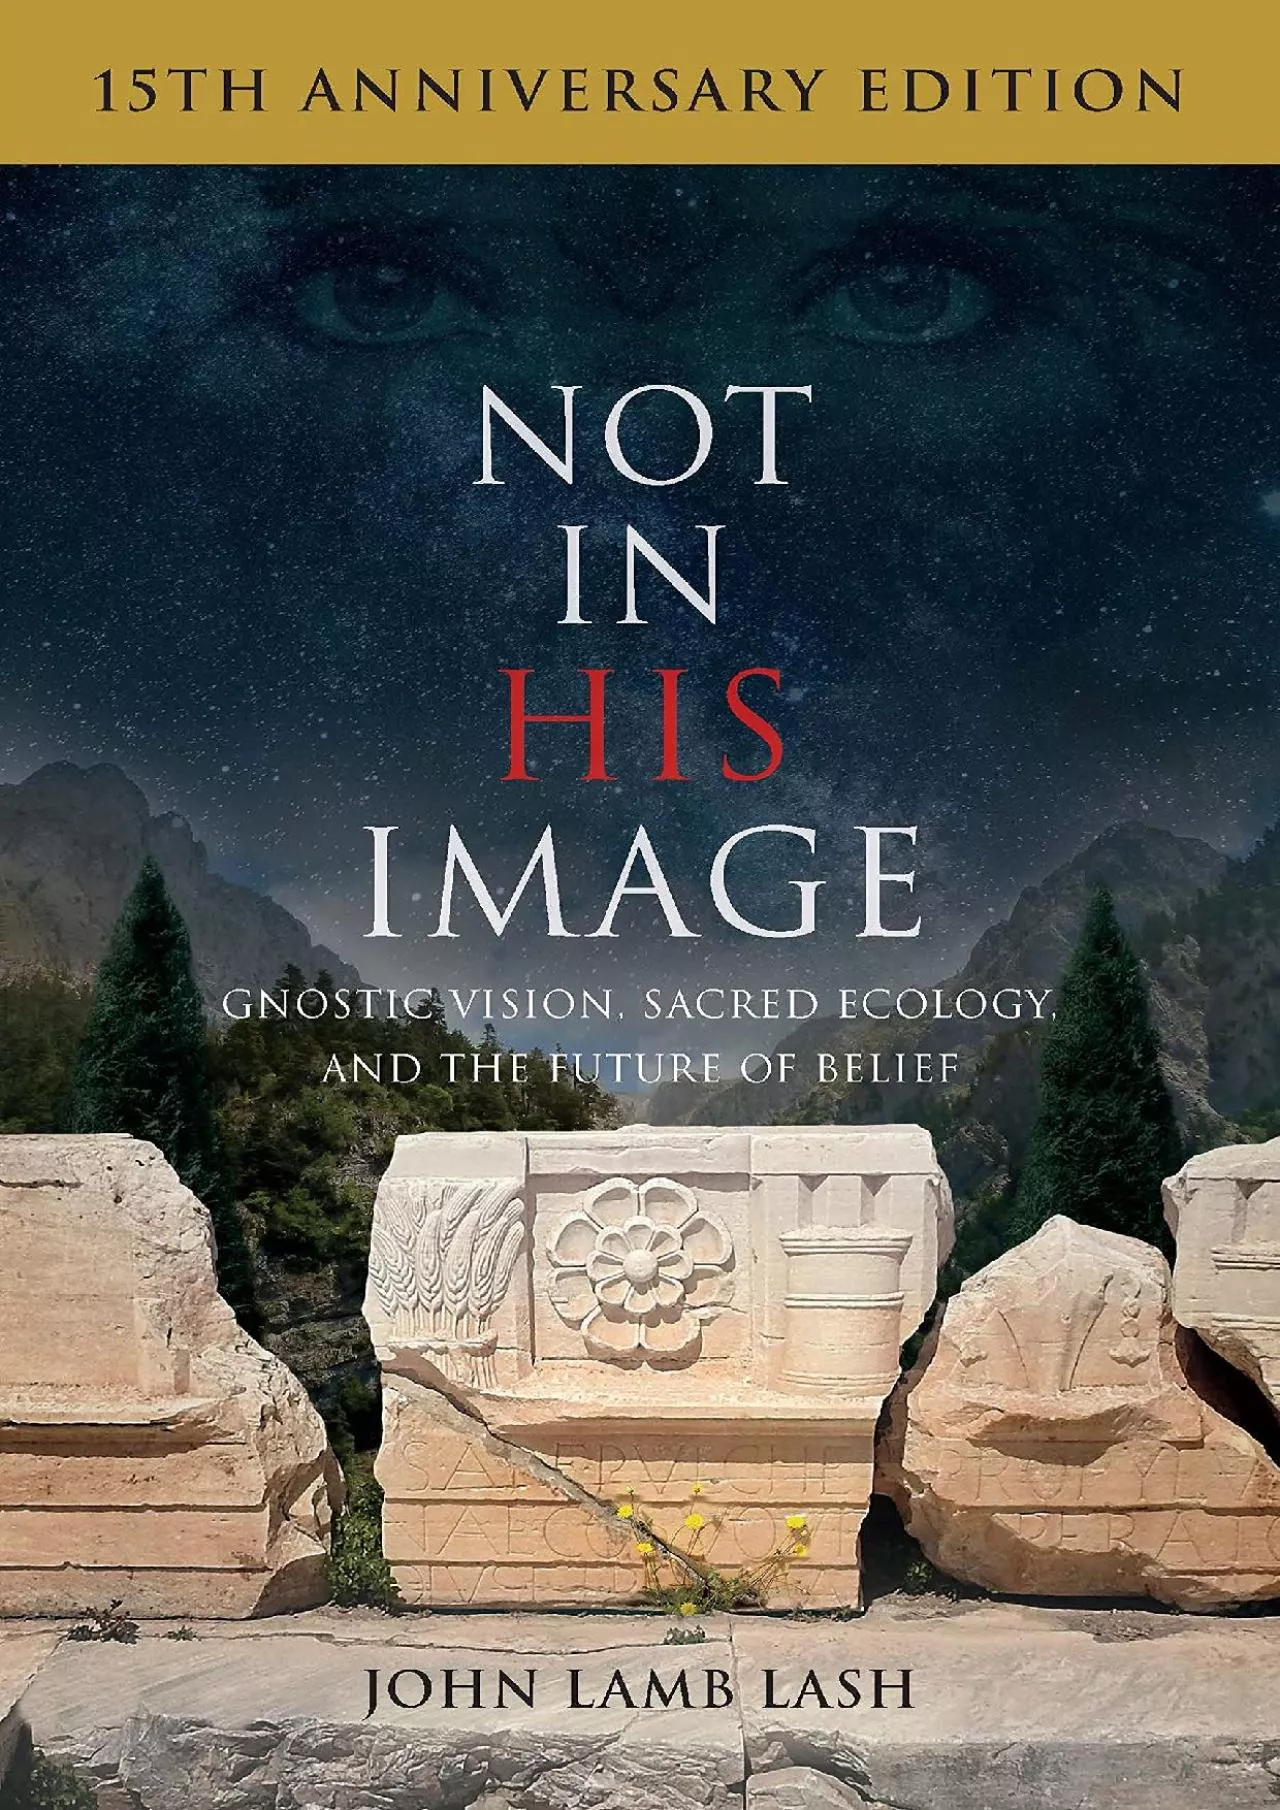 (EBOOK)-Not in His Image (15th Anniversary Edition): Gnostic Vision, Sacred Ecology, and